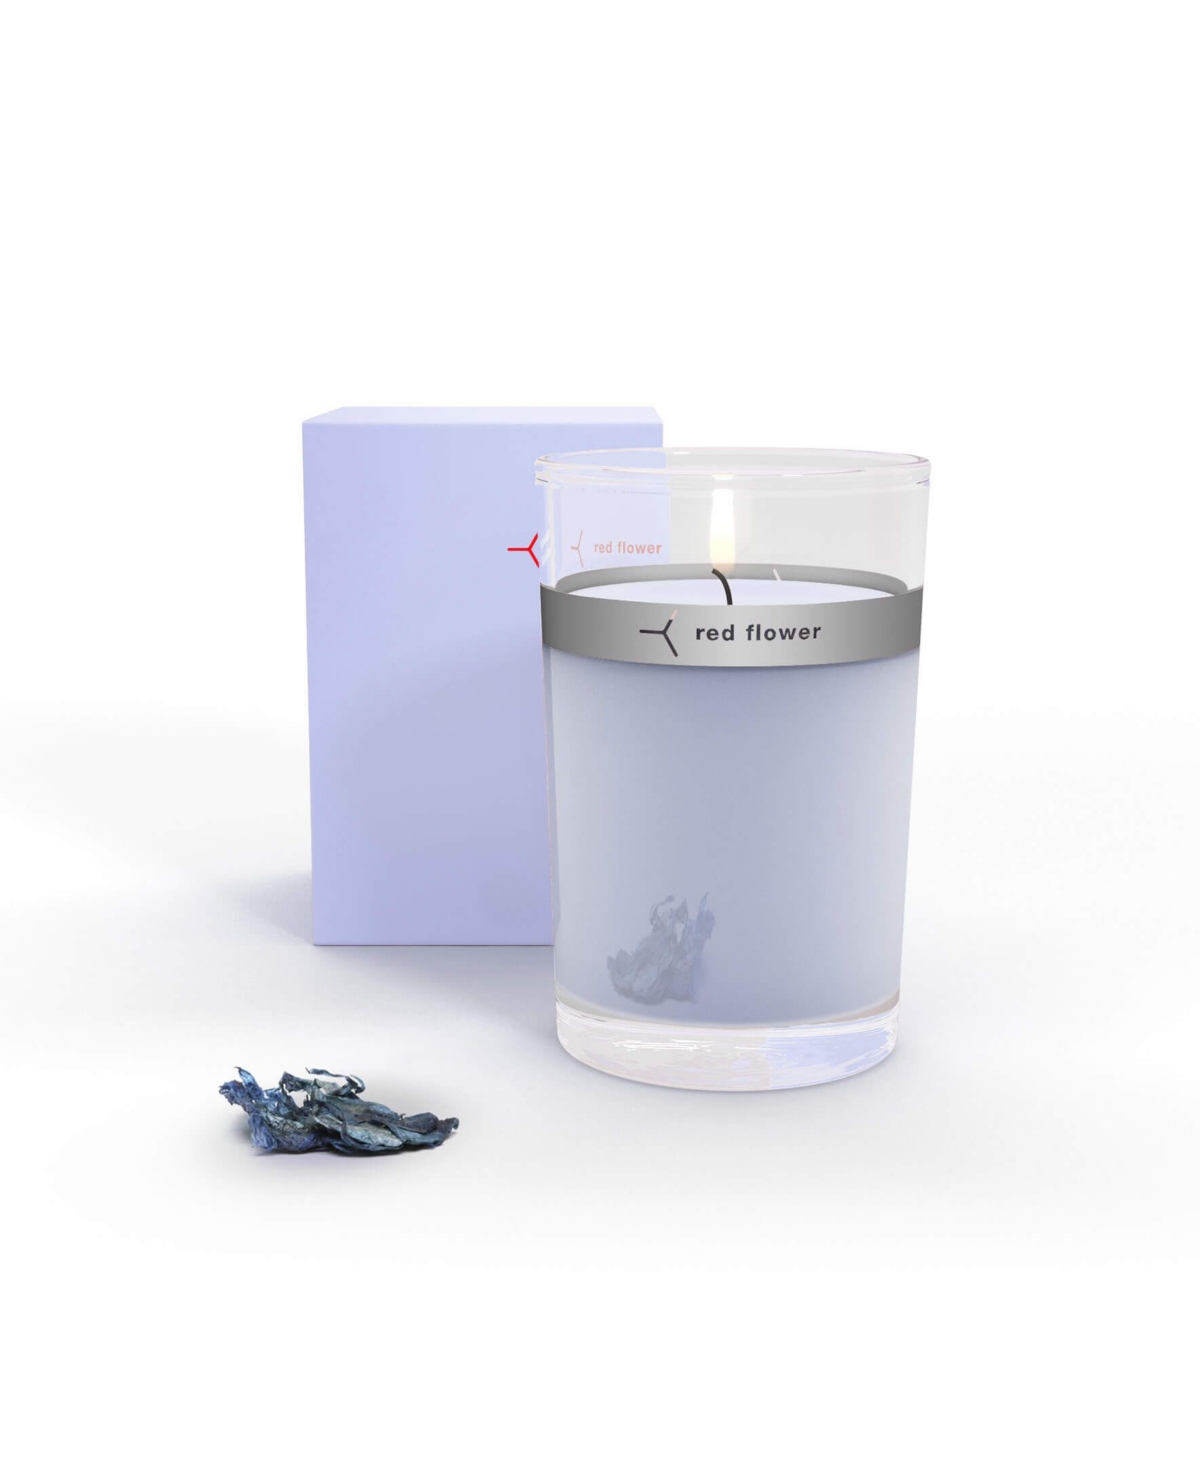 Iceland Moonflower Petal Topped Candle, 6 oz - Lilac